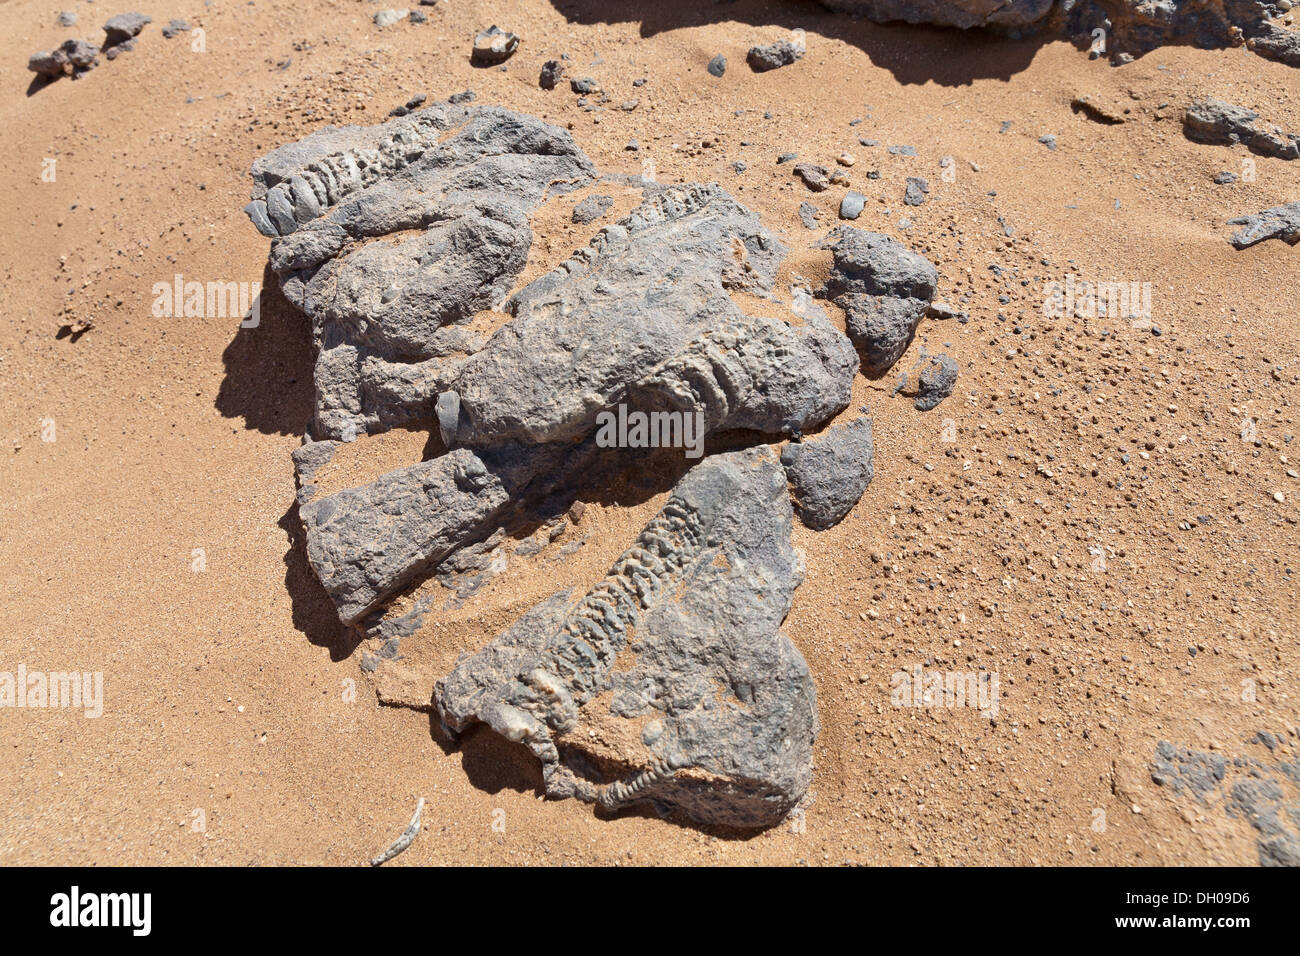 Fossils to be found in the dried up bed of Lake Iriki, to the south of Gebel Bani, near Foum-Zguid, Morocco Stock Photo